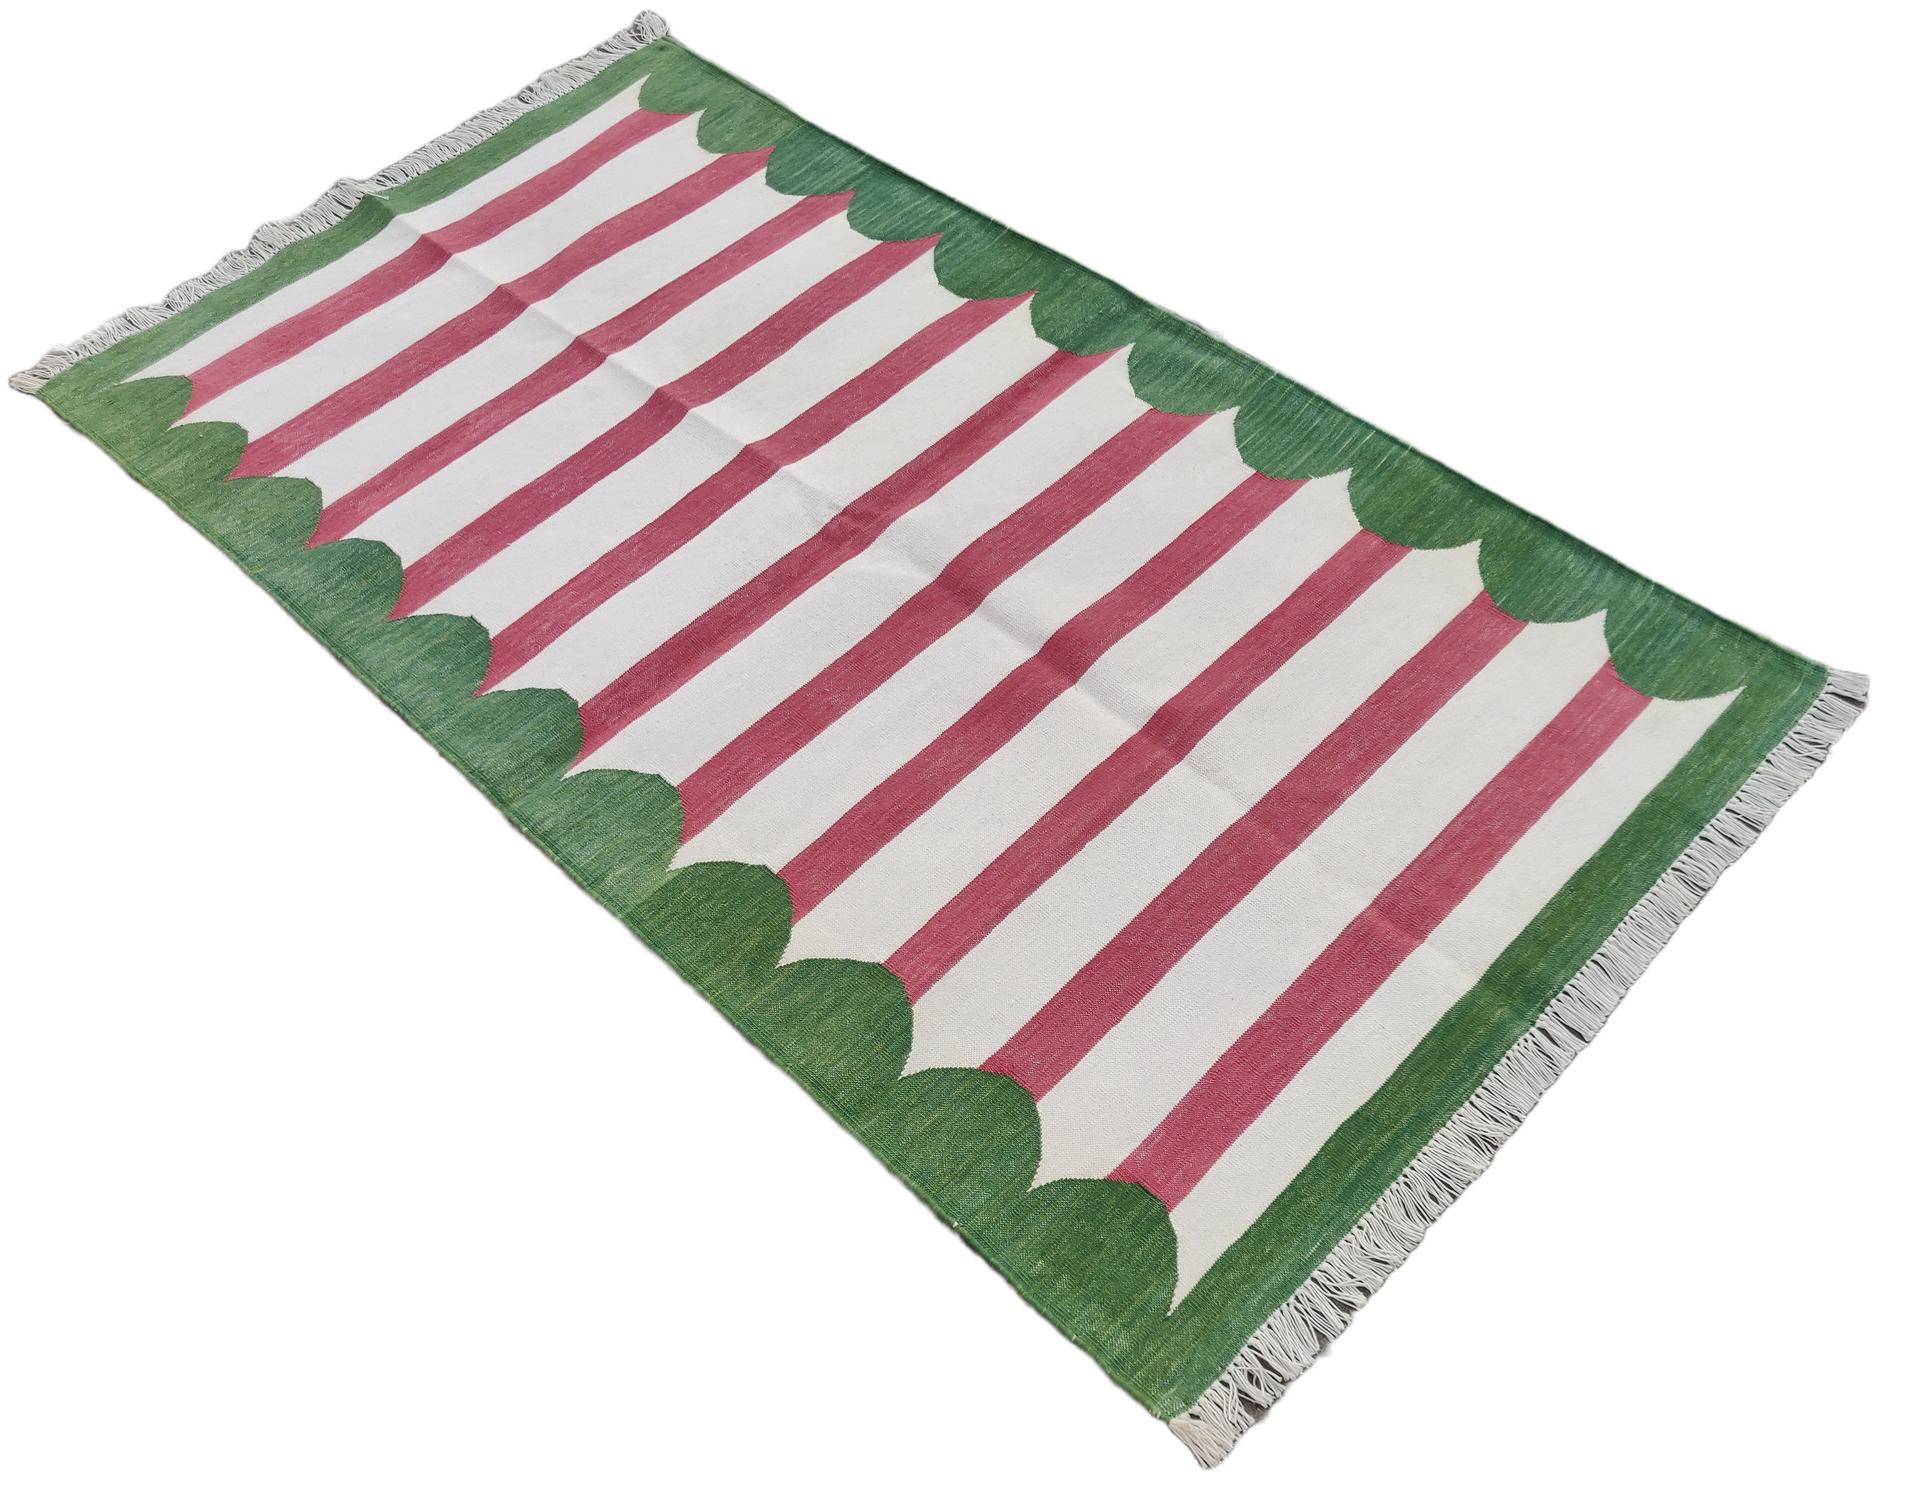 Cotton Vegetable Dyed Pink And Green Scalloped Striped Indian Dhurrie Rug-3'x5' 
These special flat-weave dhurries are hand-woven with 15 ply 100% cotton yarn. Due to the special manufacturing techniques used to create our rugs, the size and color